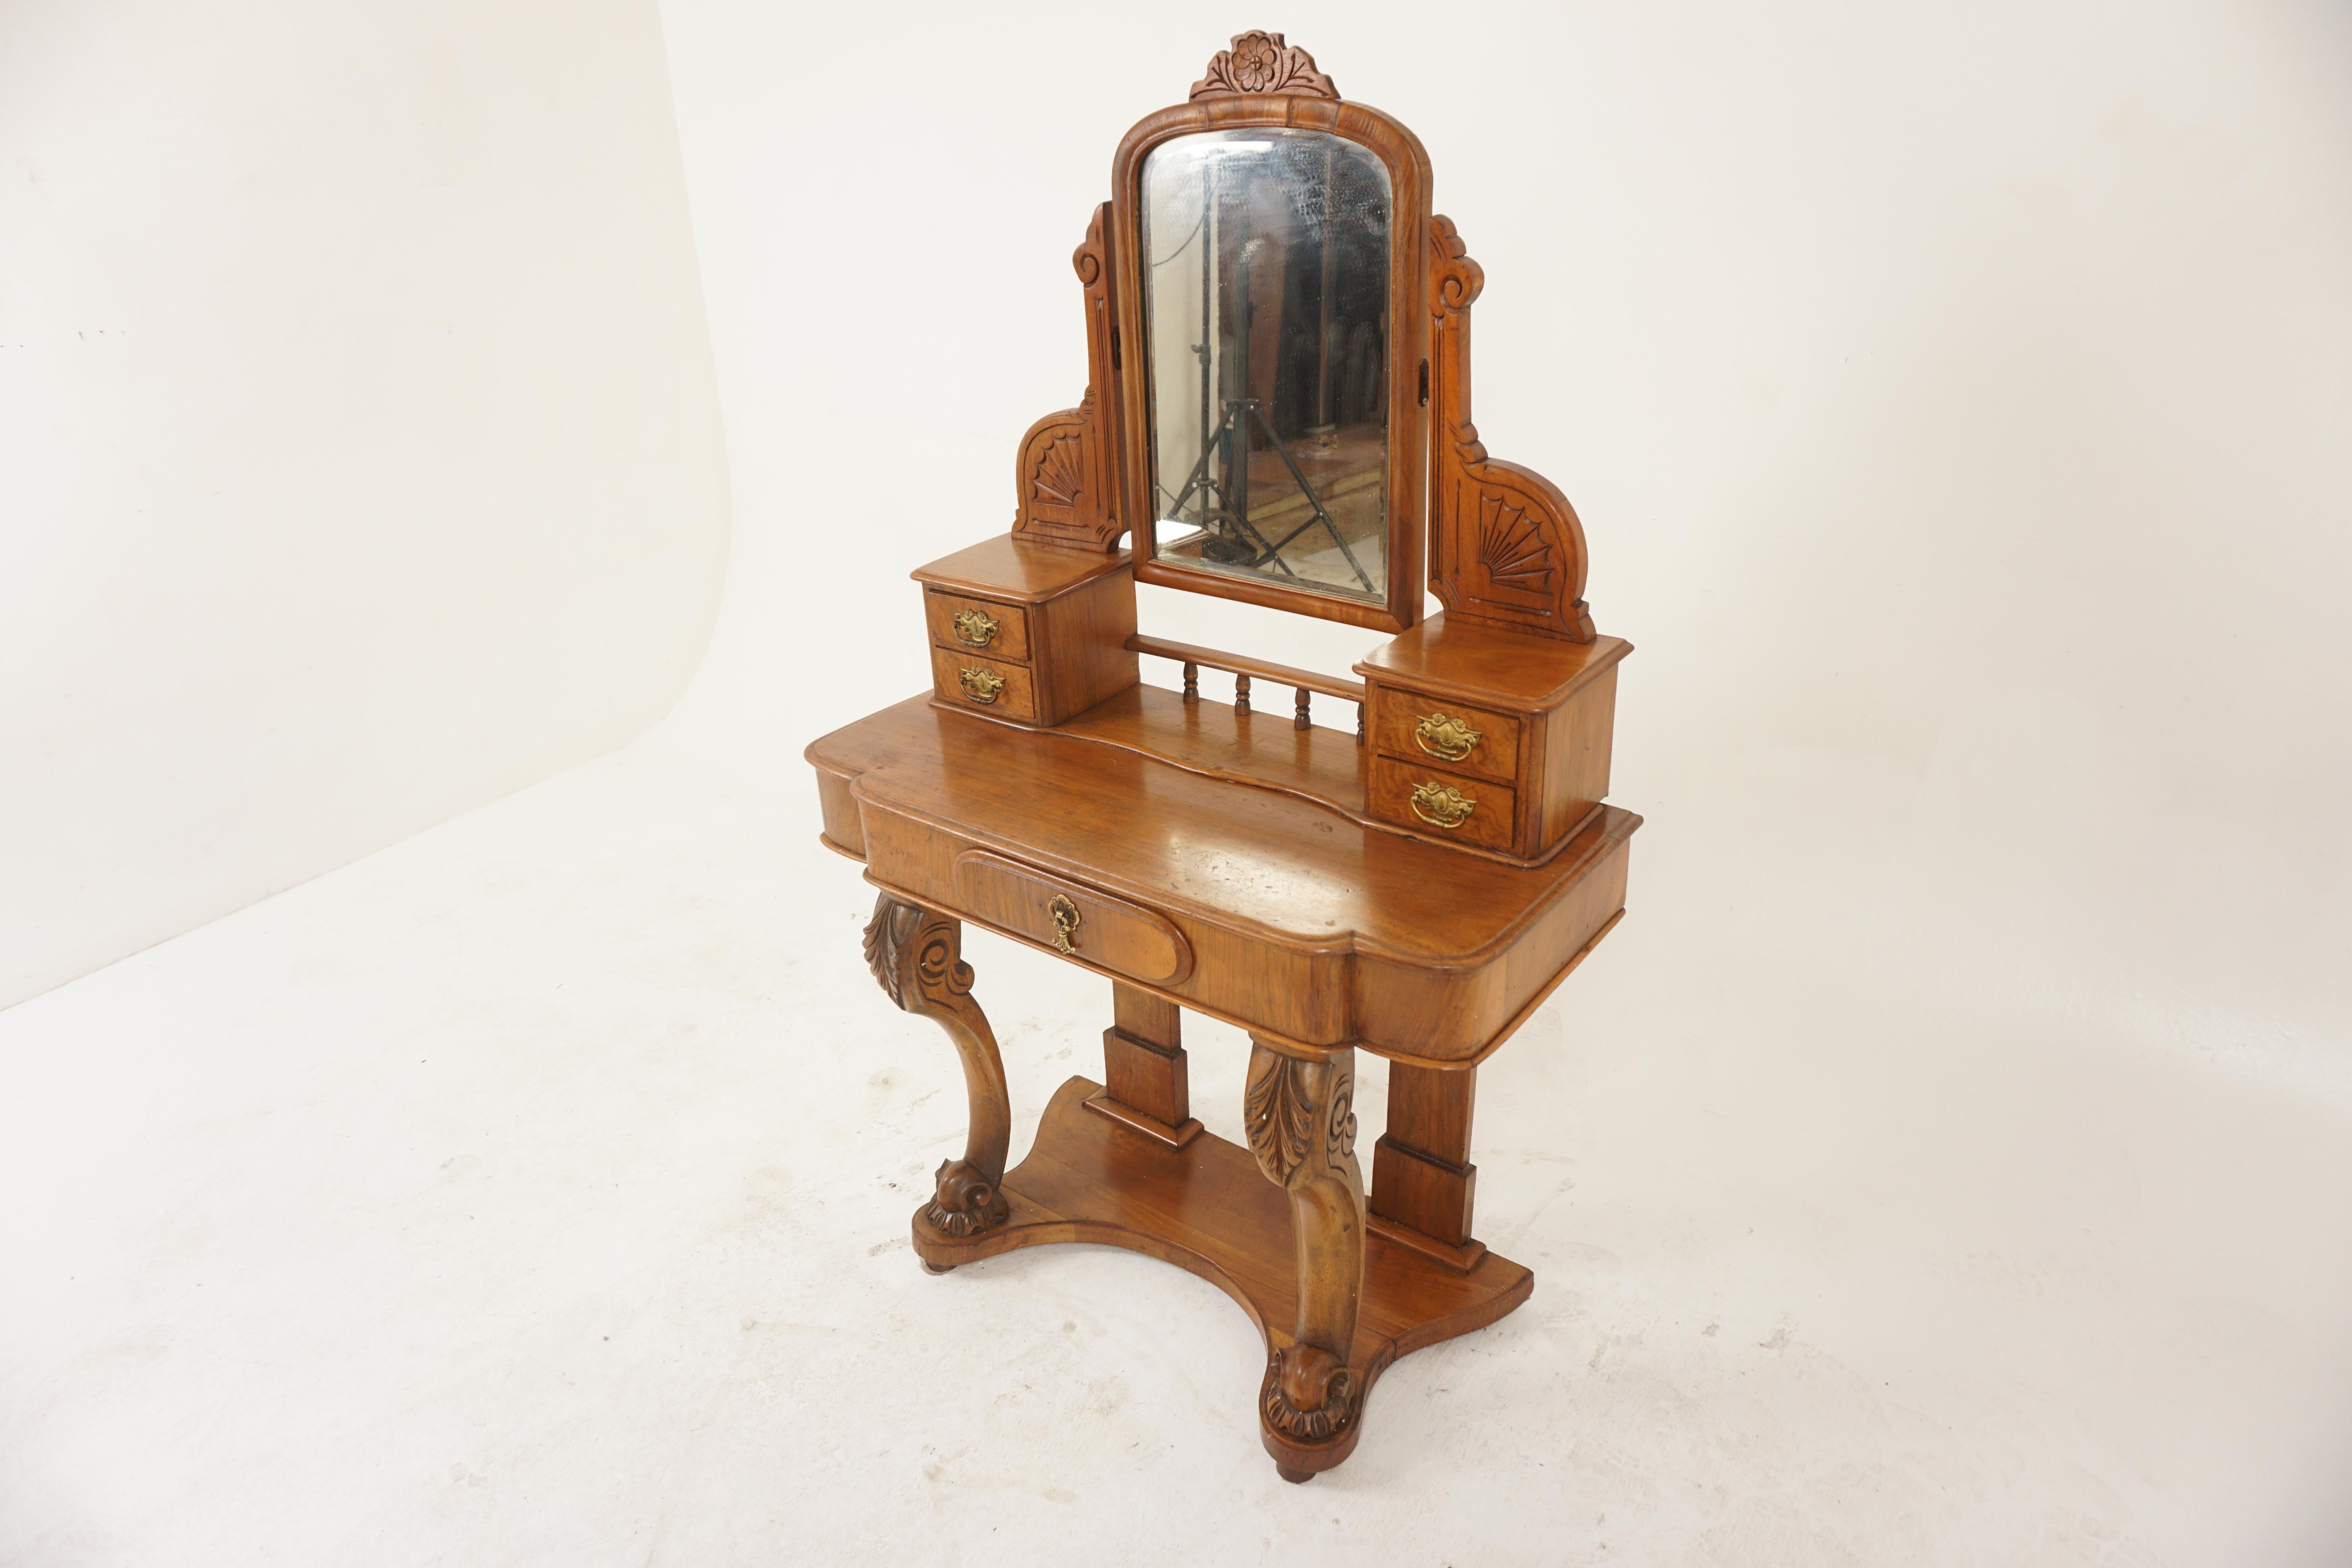 Victorian Walnut Duchess Dressing Table, Vanity, Scotland 1870, H1160

Solid Walnut and veneer
Original finish
Original framed mirror with pediment on top
Supported by carved supports
Open gallery on the back
Flanked by a pair of drawer chests with